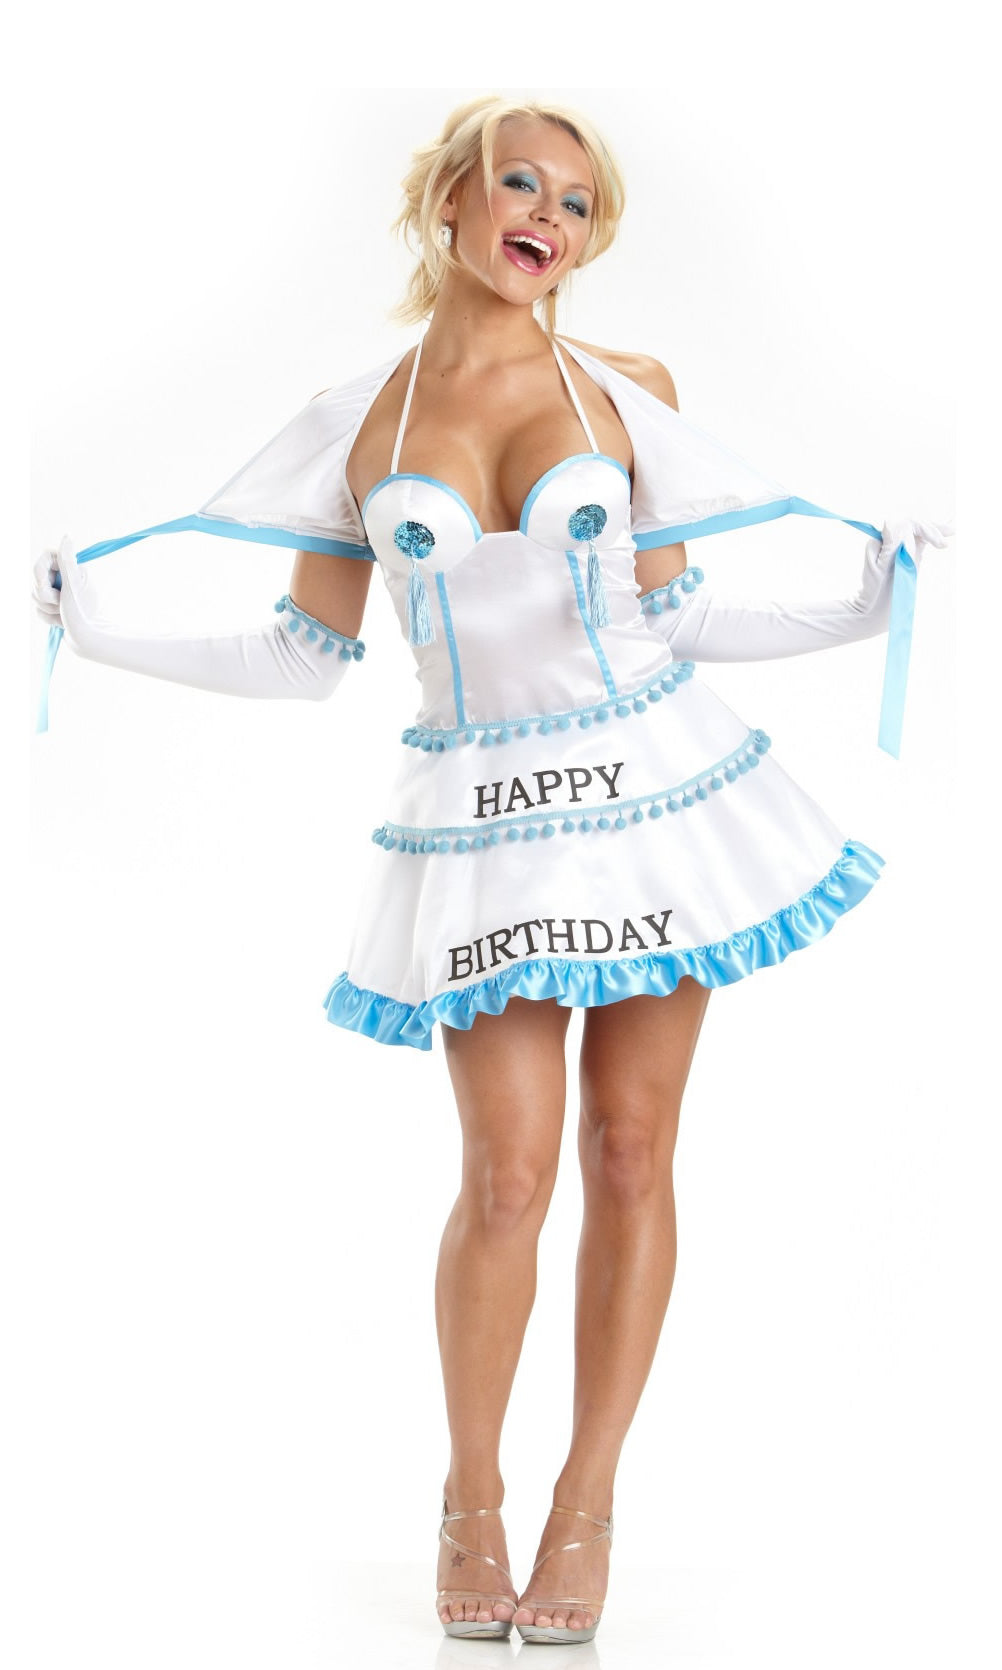 Birthday cake surprise costume in white and blue with 'Happy Birthday' printed, with long gloves